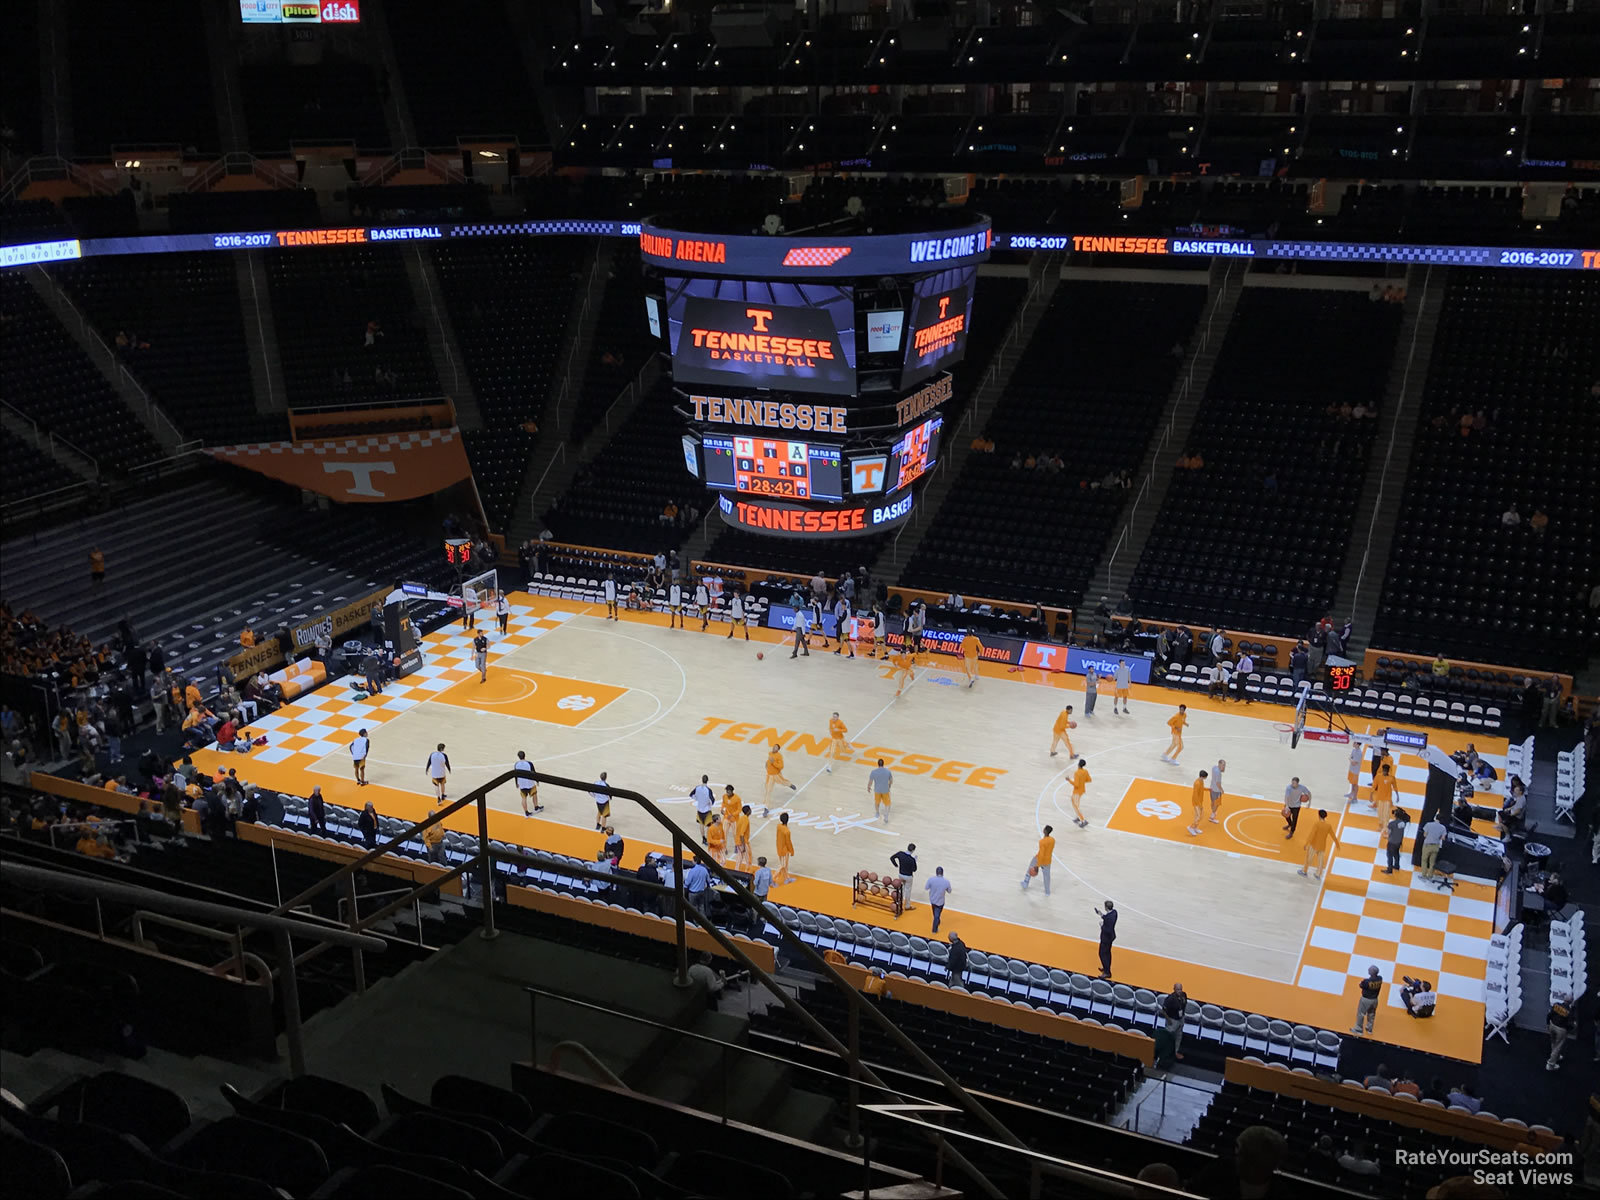 section 319, row 7 seat view  - thompson-boling arena